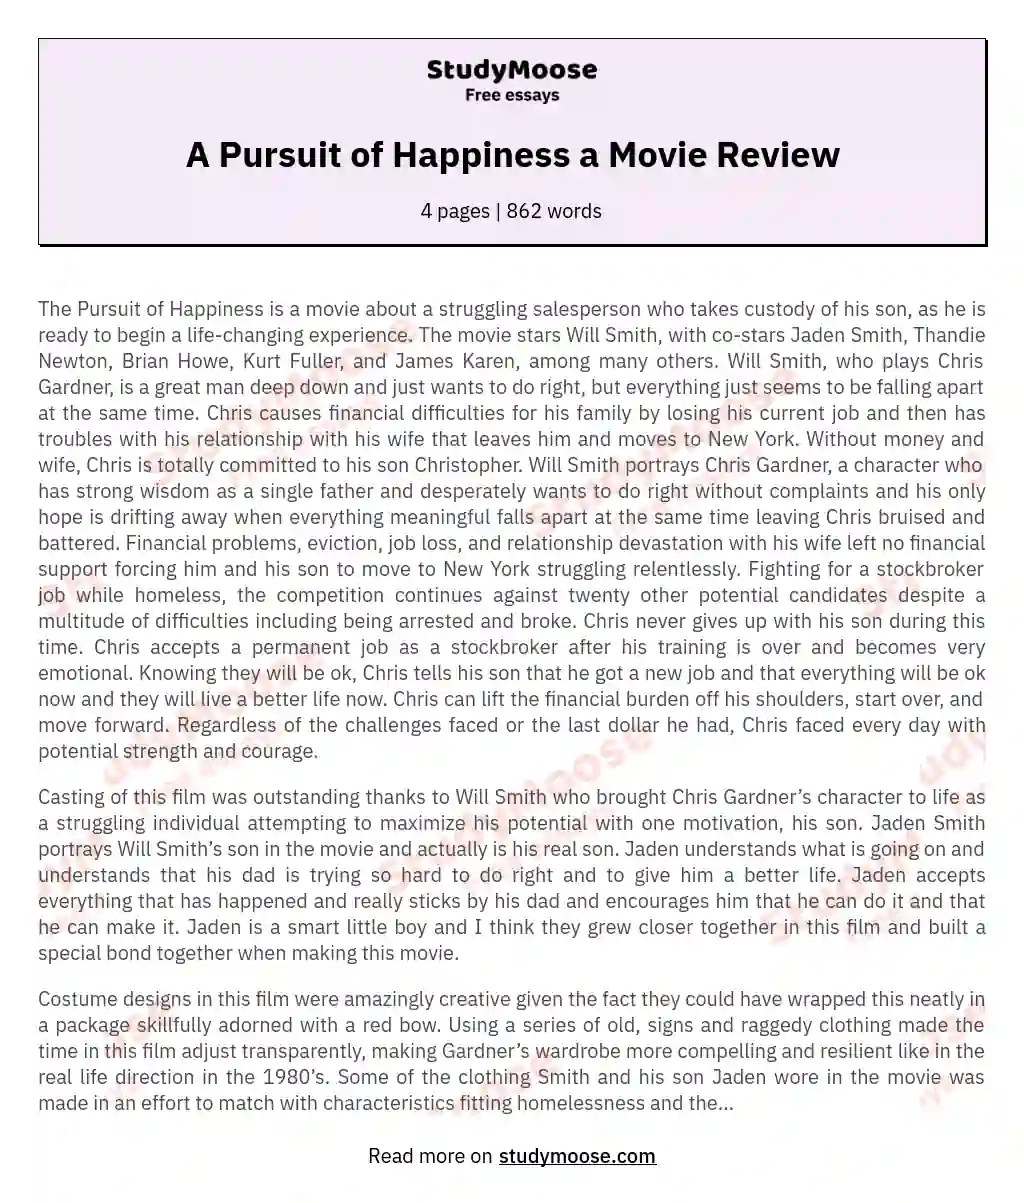 A Pursuit of Happiness a Movie Review essay